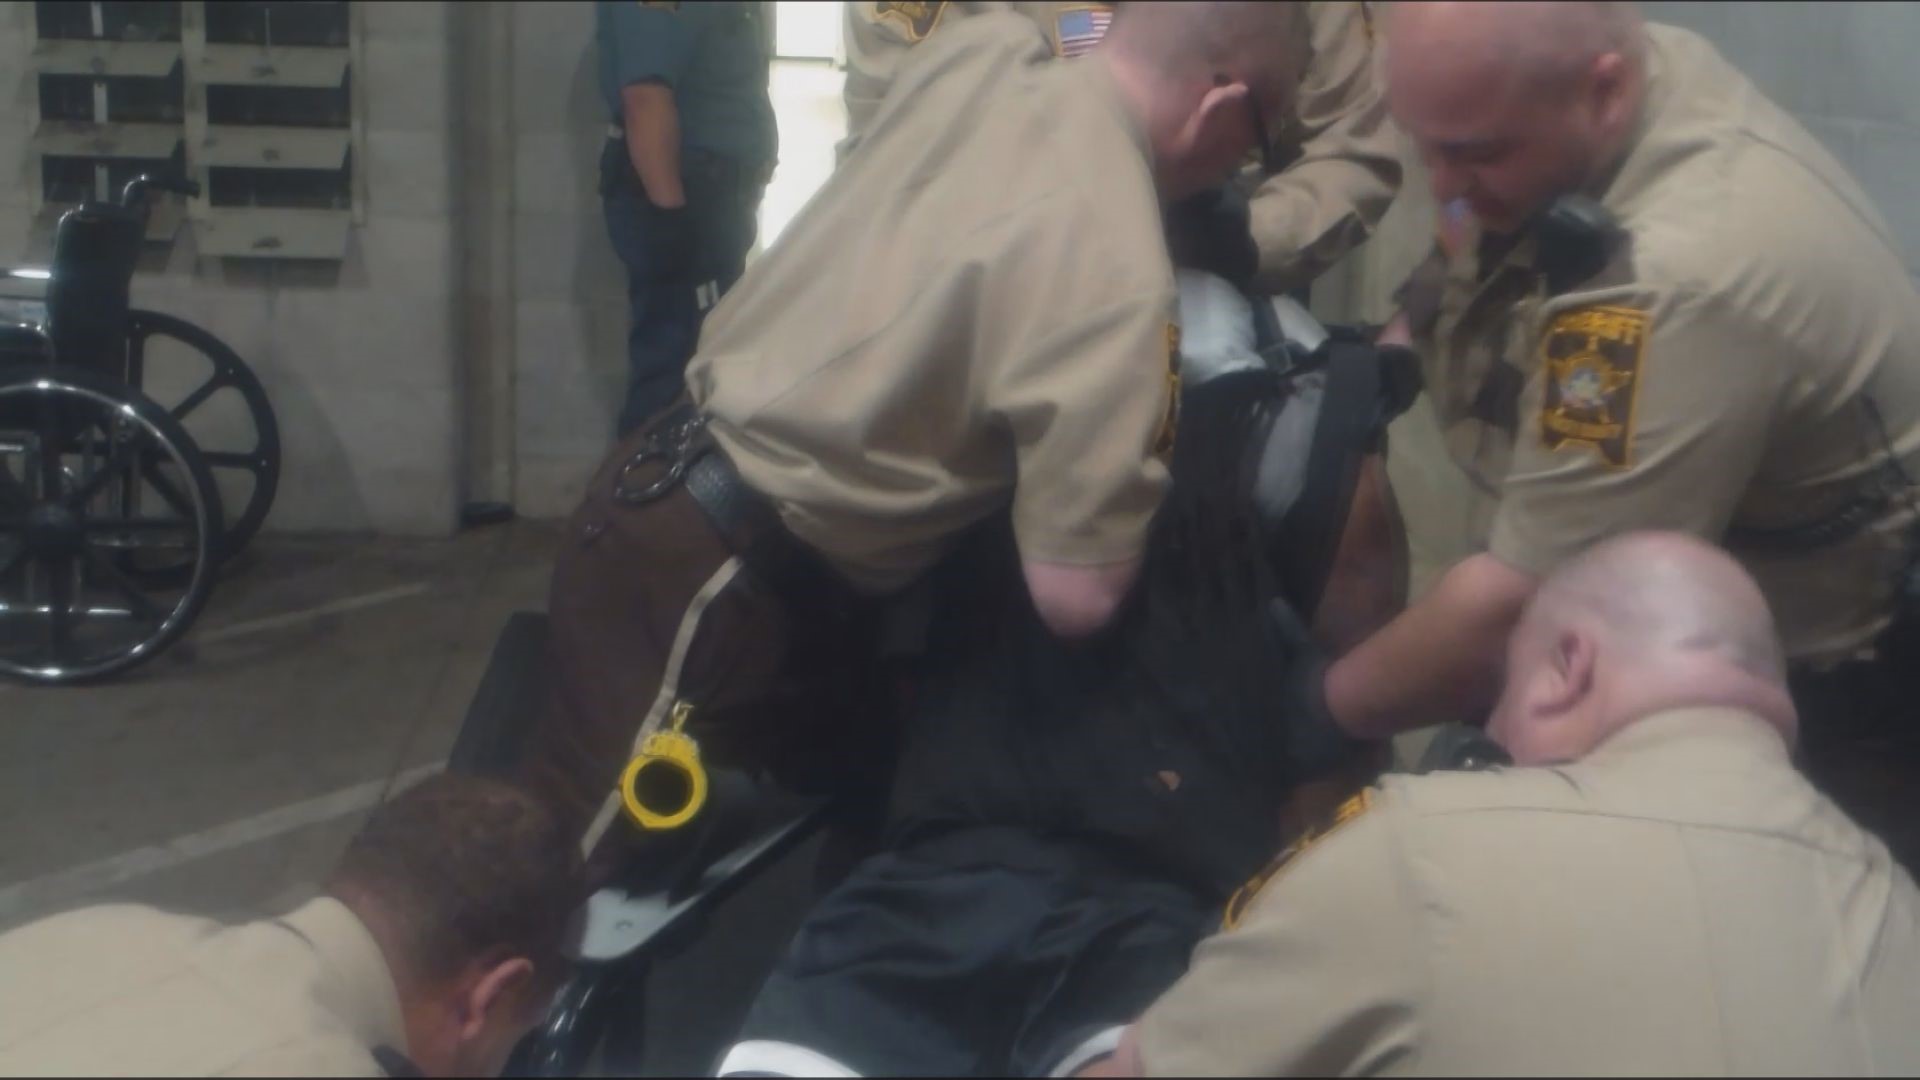 Two years after being caught on tape beating a prisoner, a Ramsey County correctional officer has resigned, and video of the attack has been made public. https://kare11.tv/2Xhdb2m